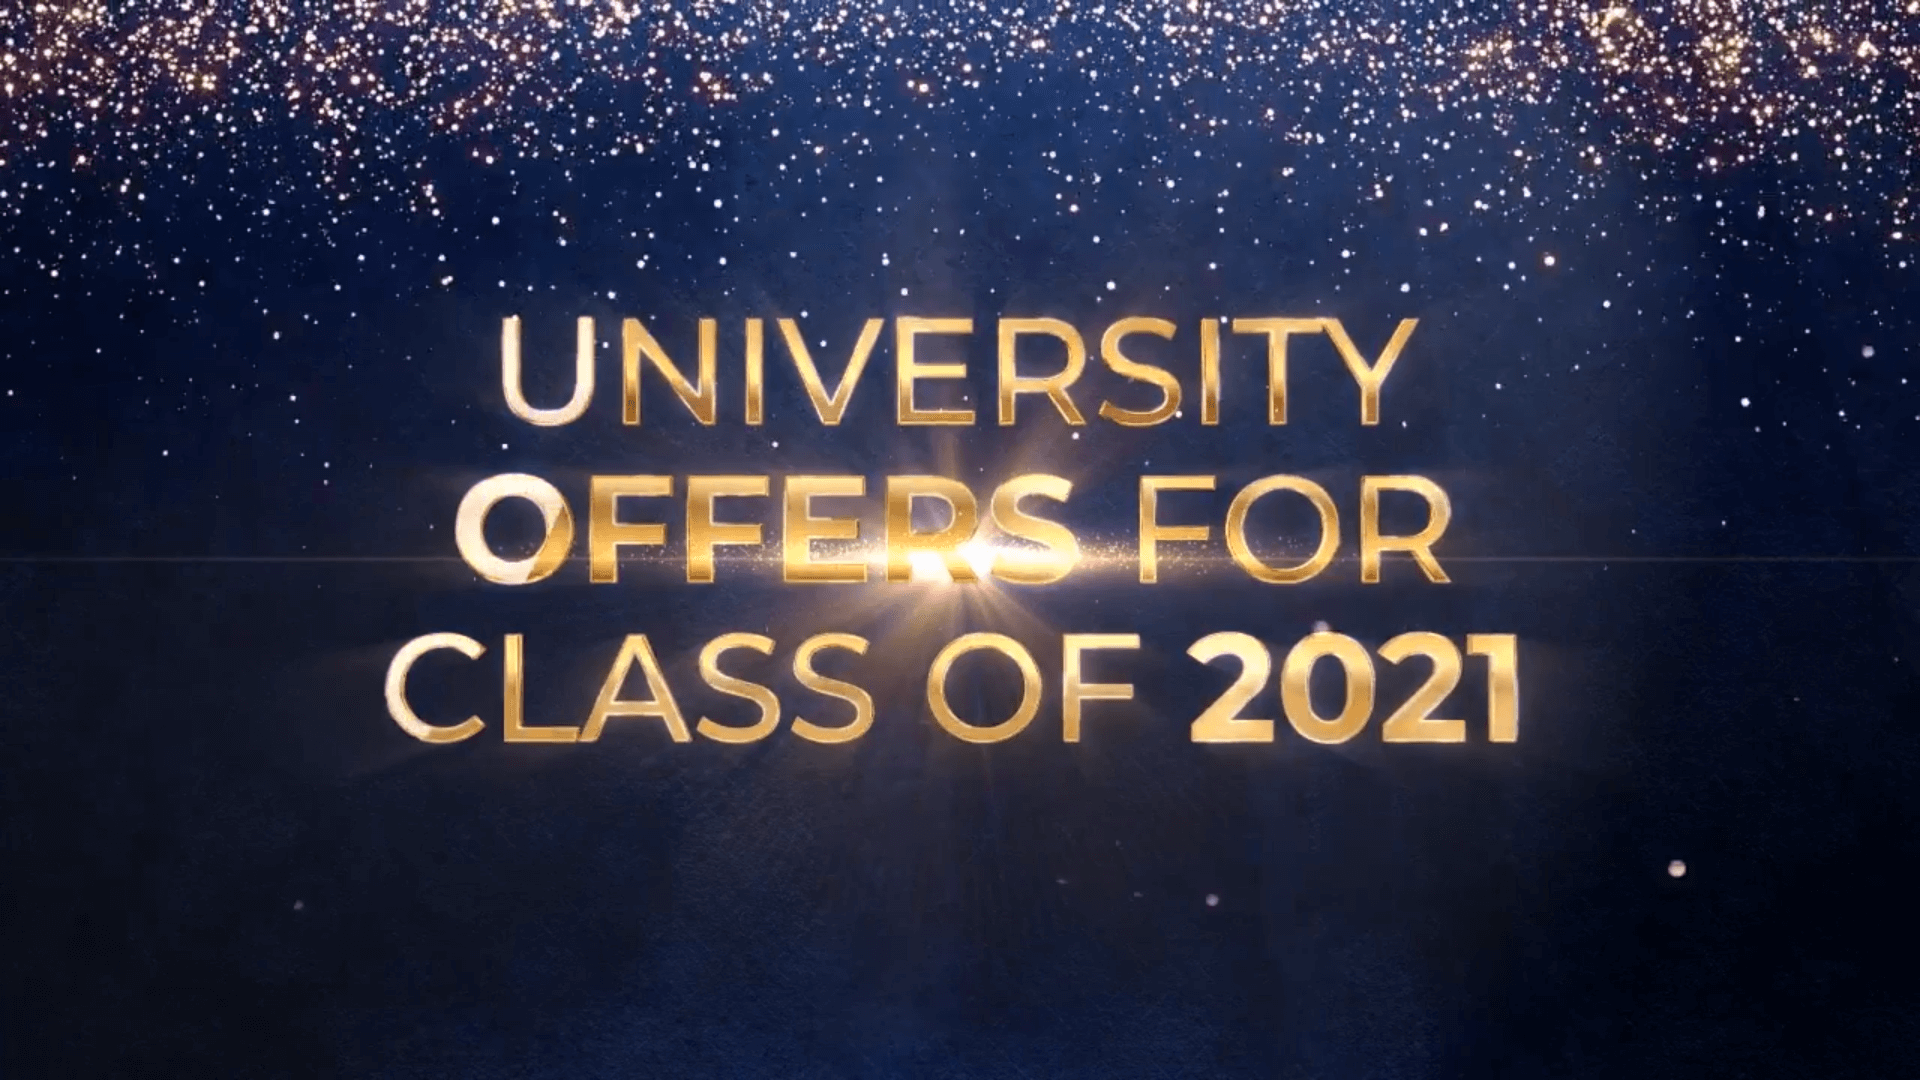 University Offers for Class of 2021